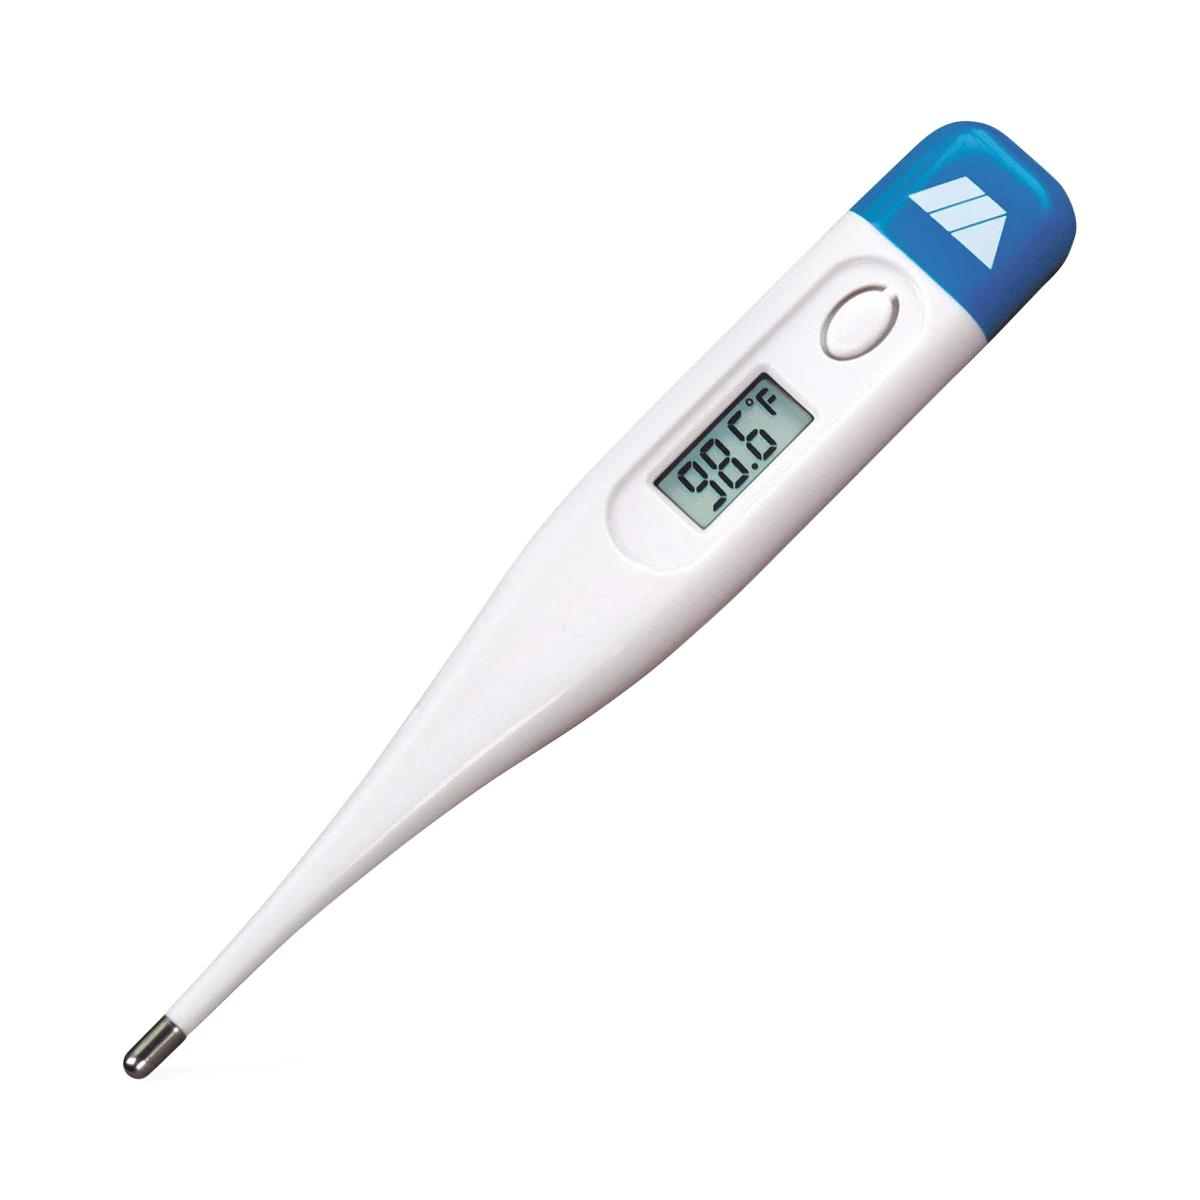 Medline Instant Read Digital Temple Thermometer